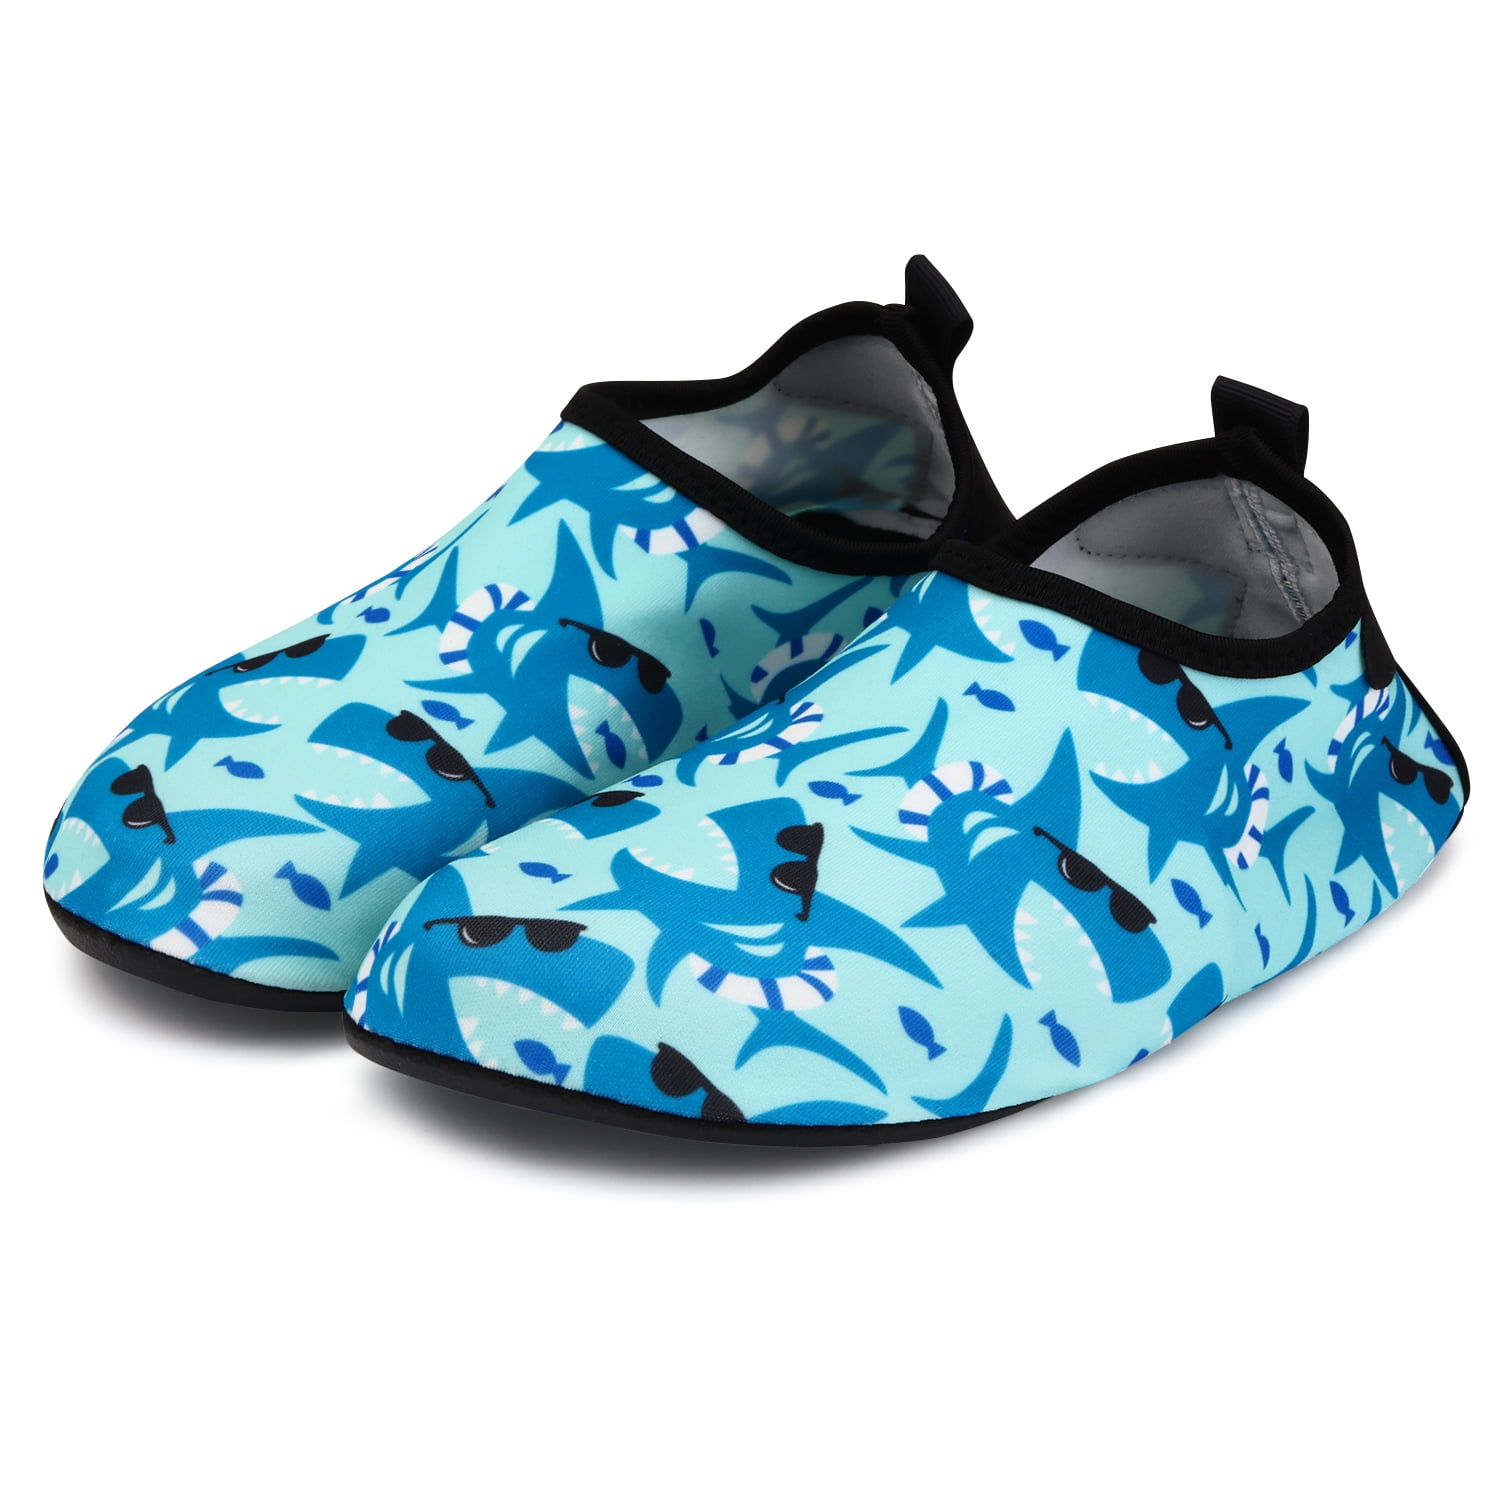 Bridawn - Kids Water Shoes -Bridawn Barefoot Shoes Toddler Swim Shoes ...